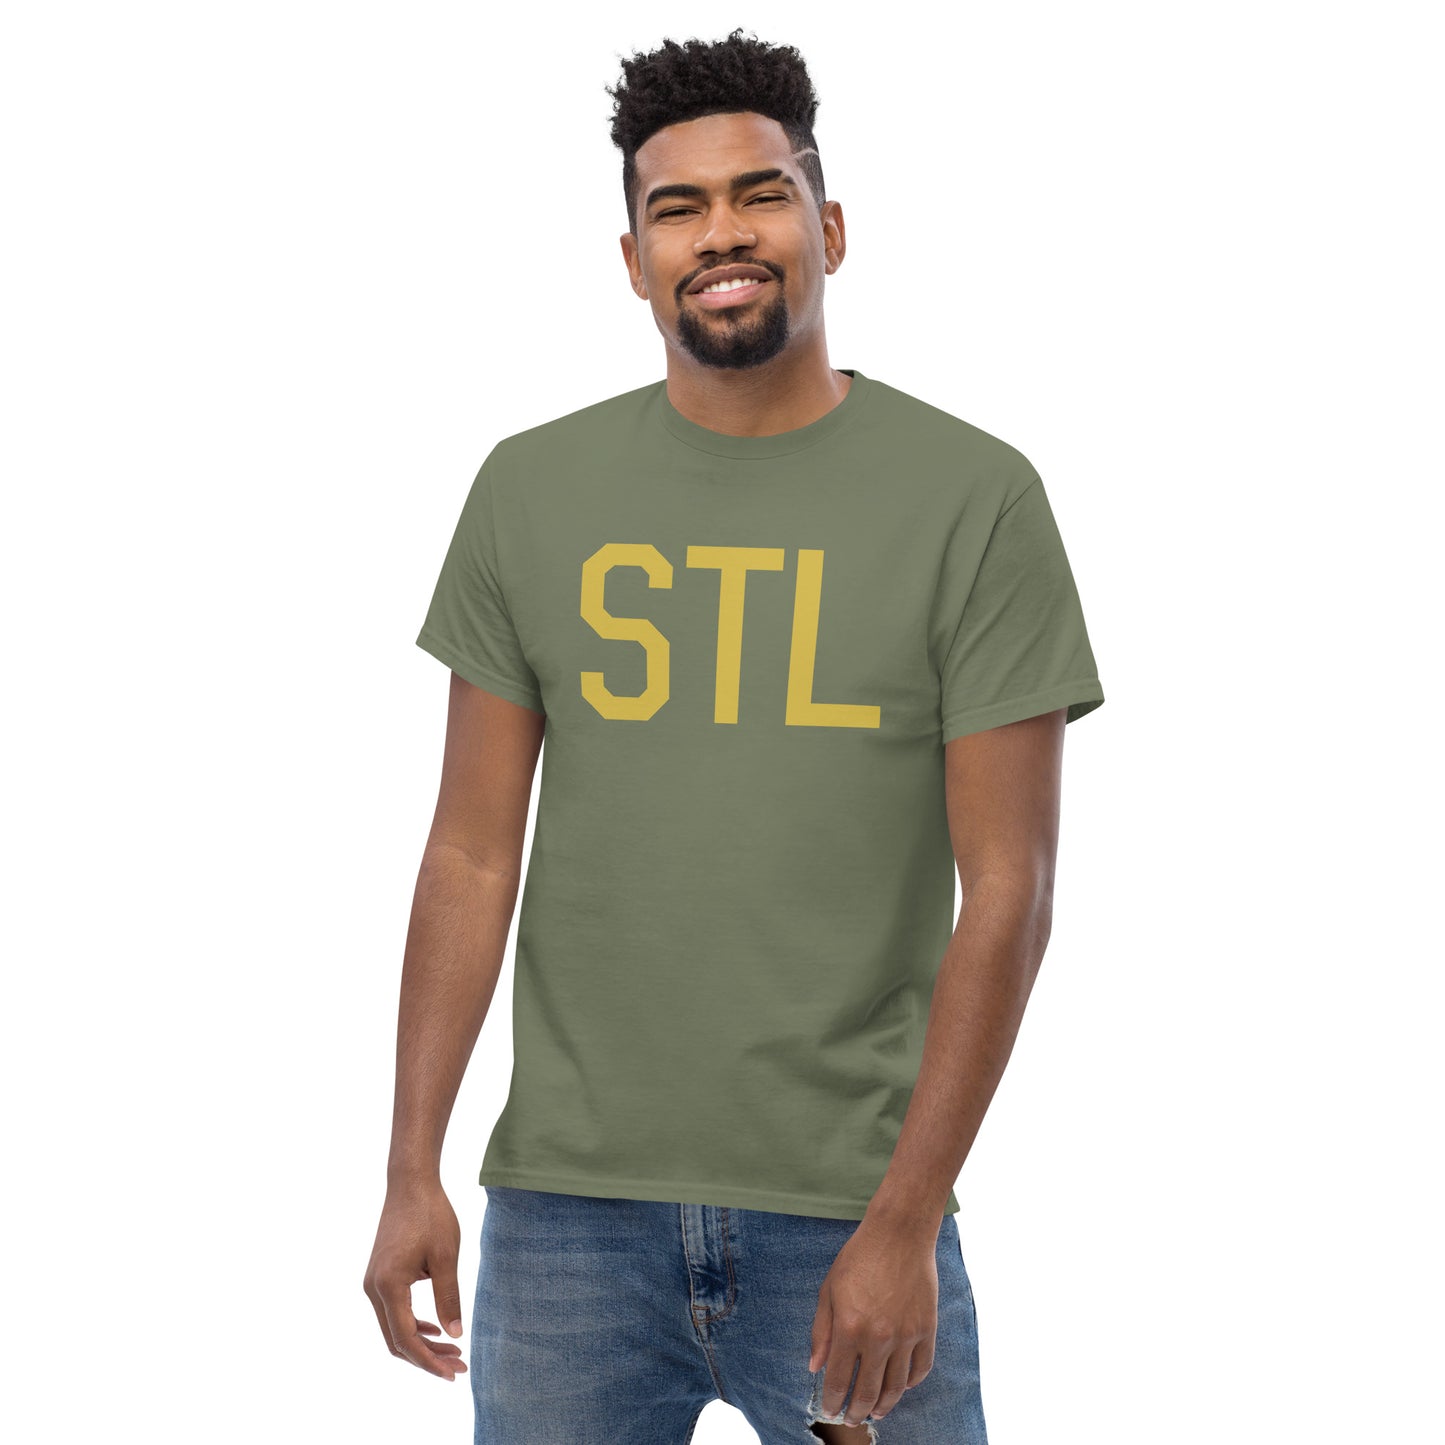 Aviation Enthusiast Men's Tee - Old Gold Graphic • STL St. Louis • YHM Designs - Image 06